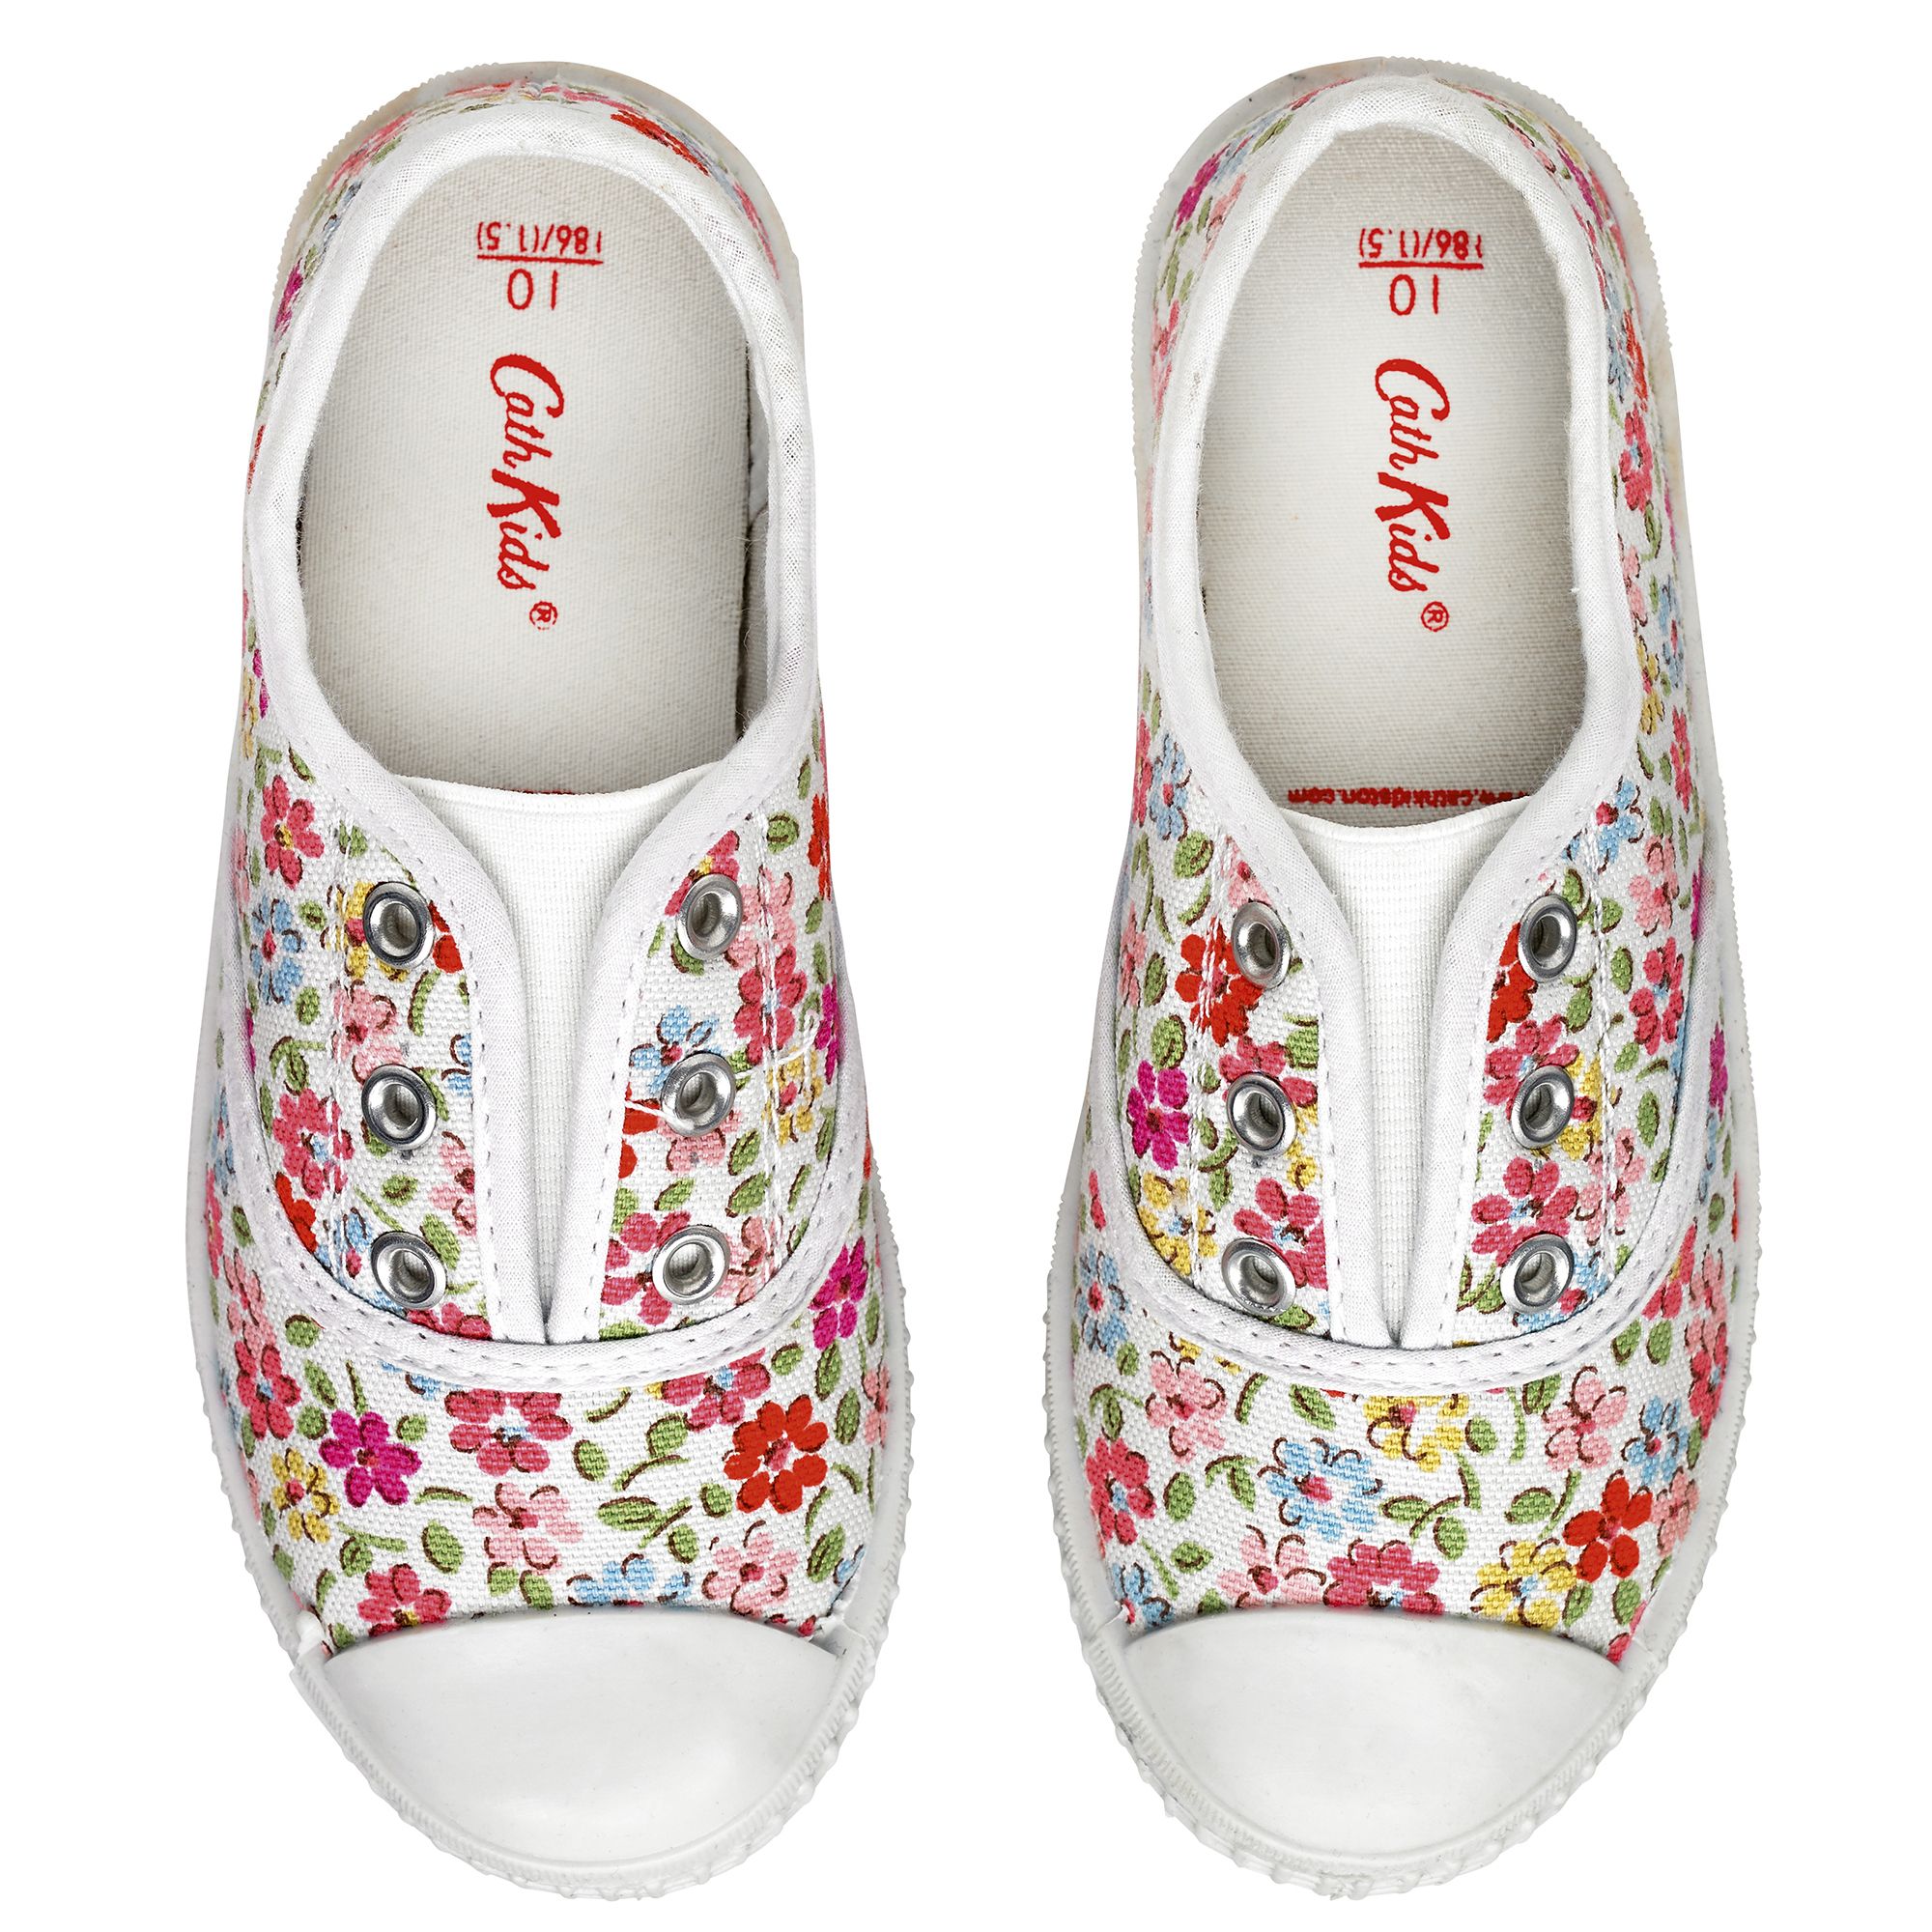 Cath Kidston Garden Ditsy Canvas Shoes 